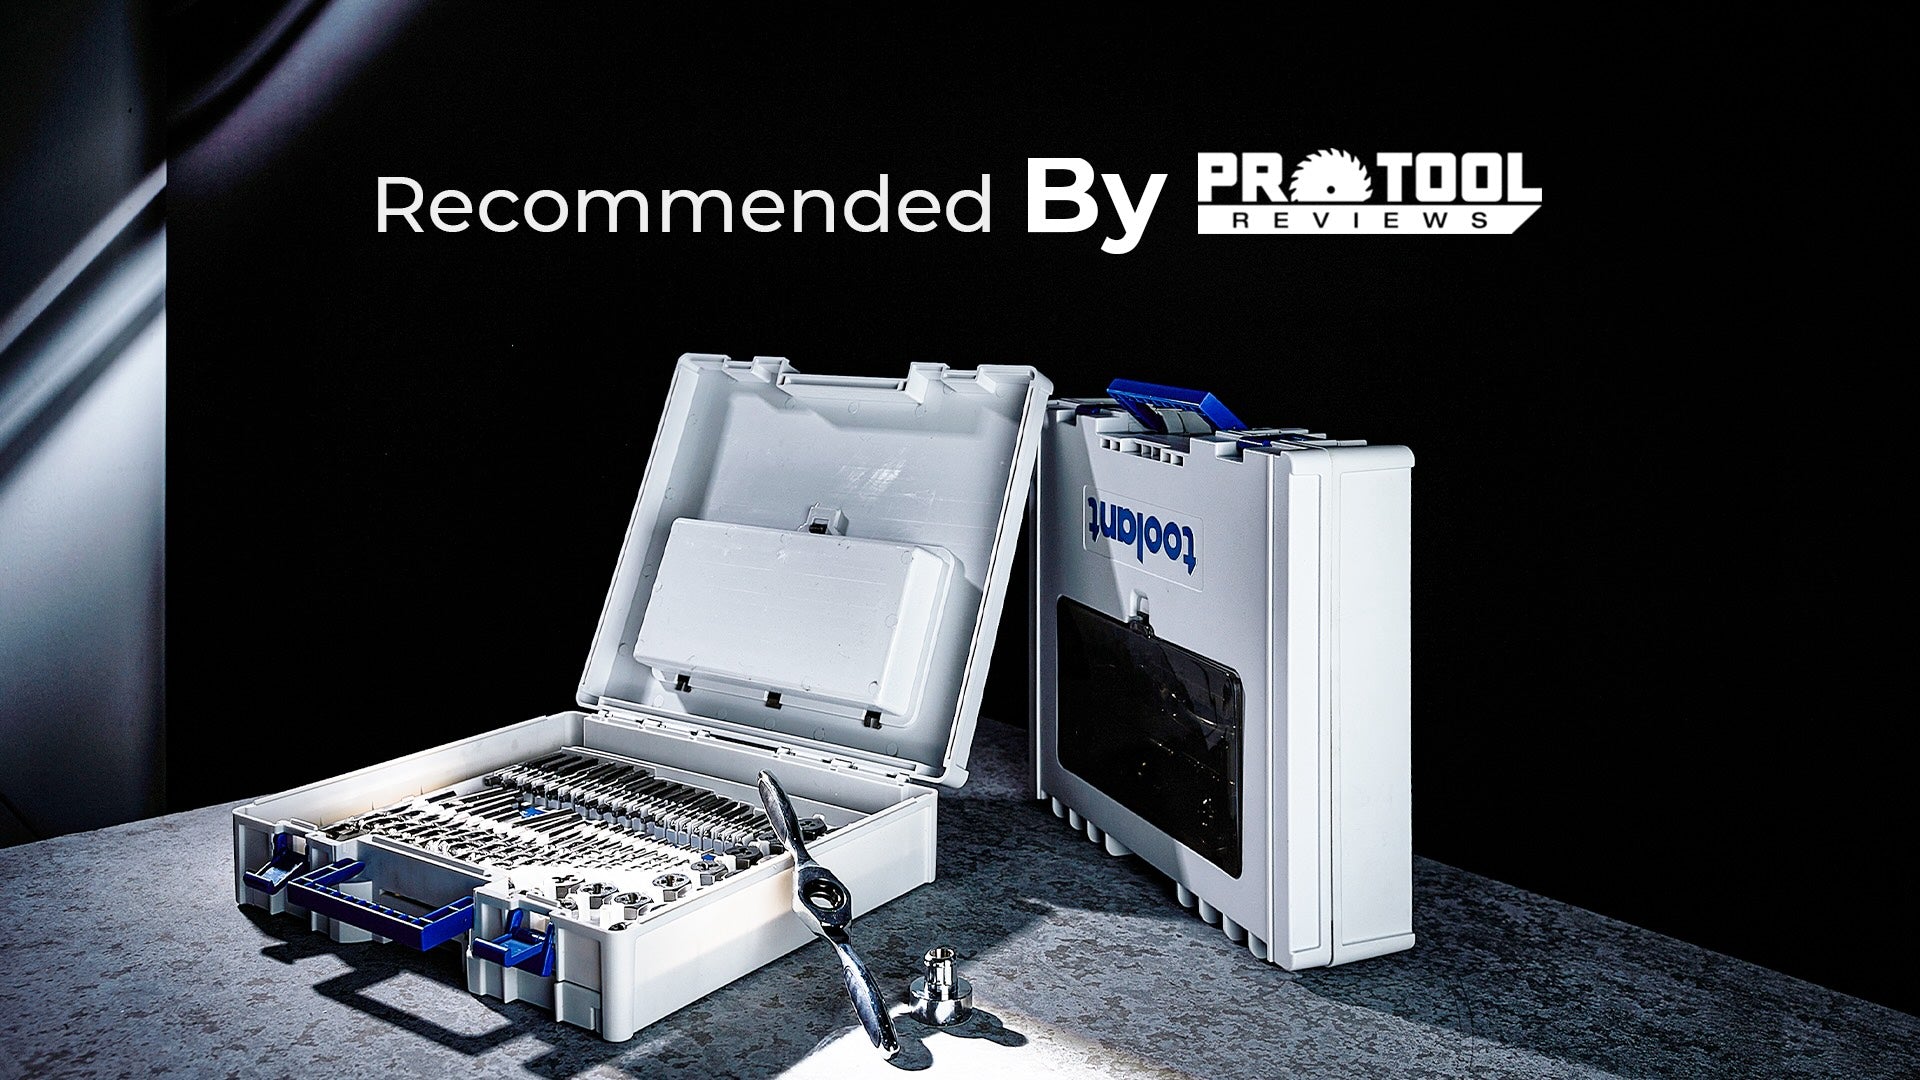 Recommended By Pro Tool Reviews